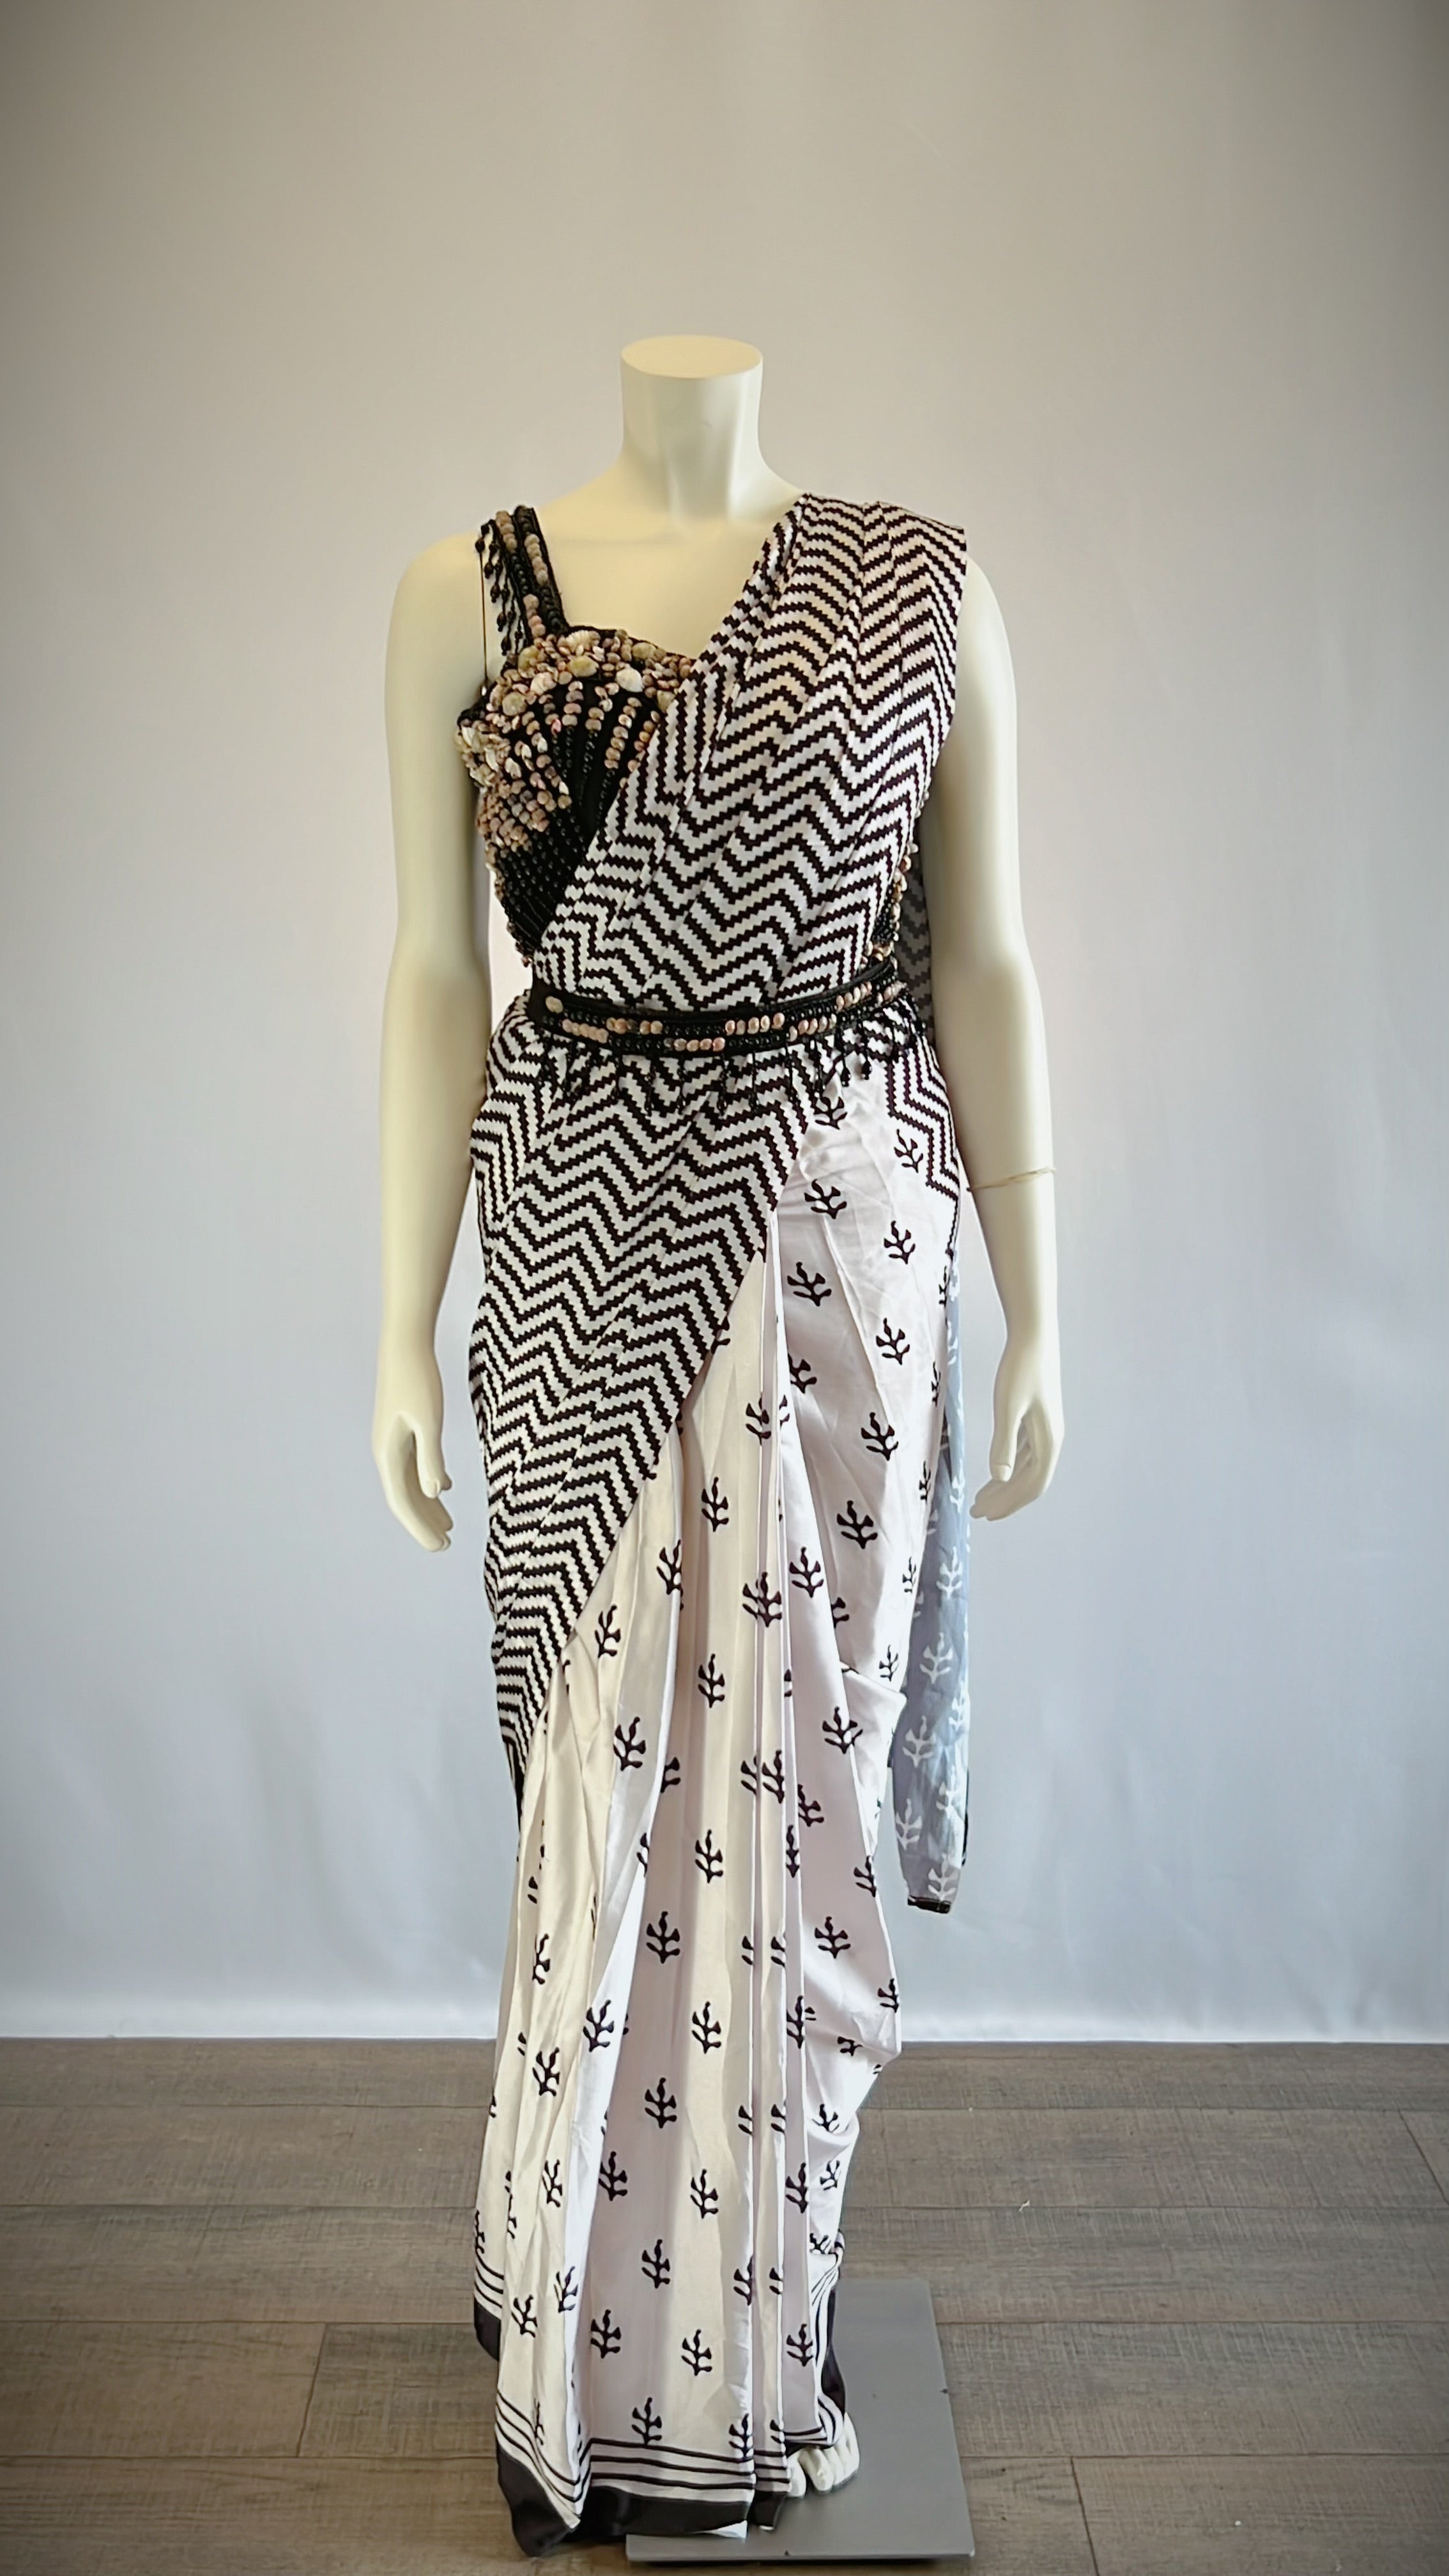 Pre-Stitched Printed Black and White Saree with Seashell Embroidery Blouse